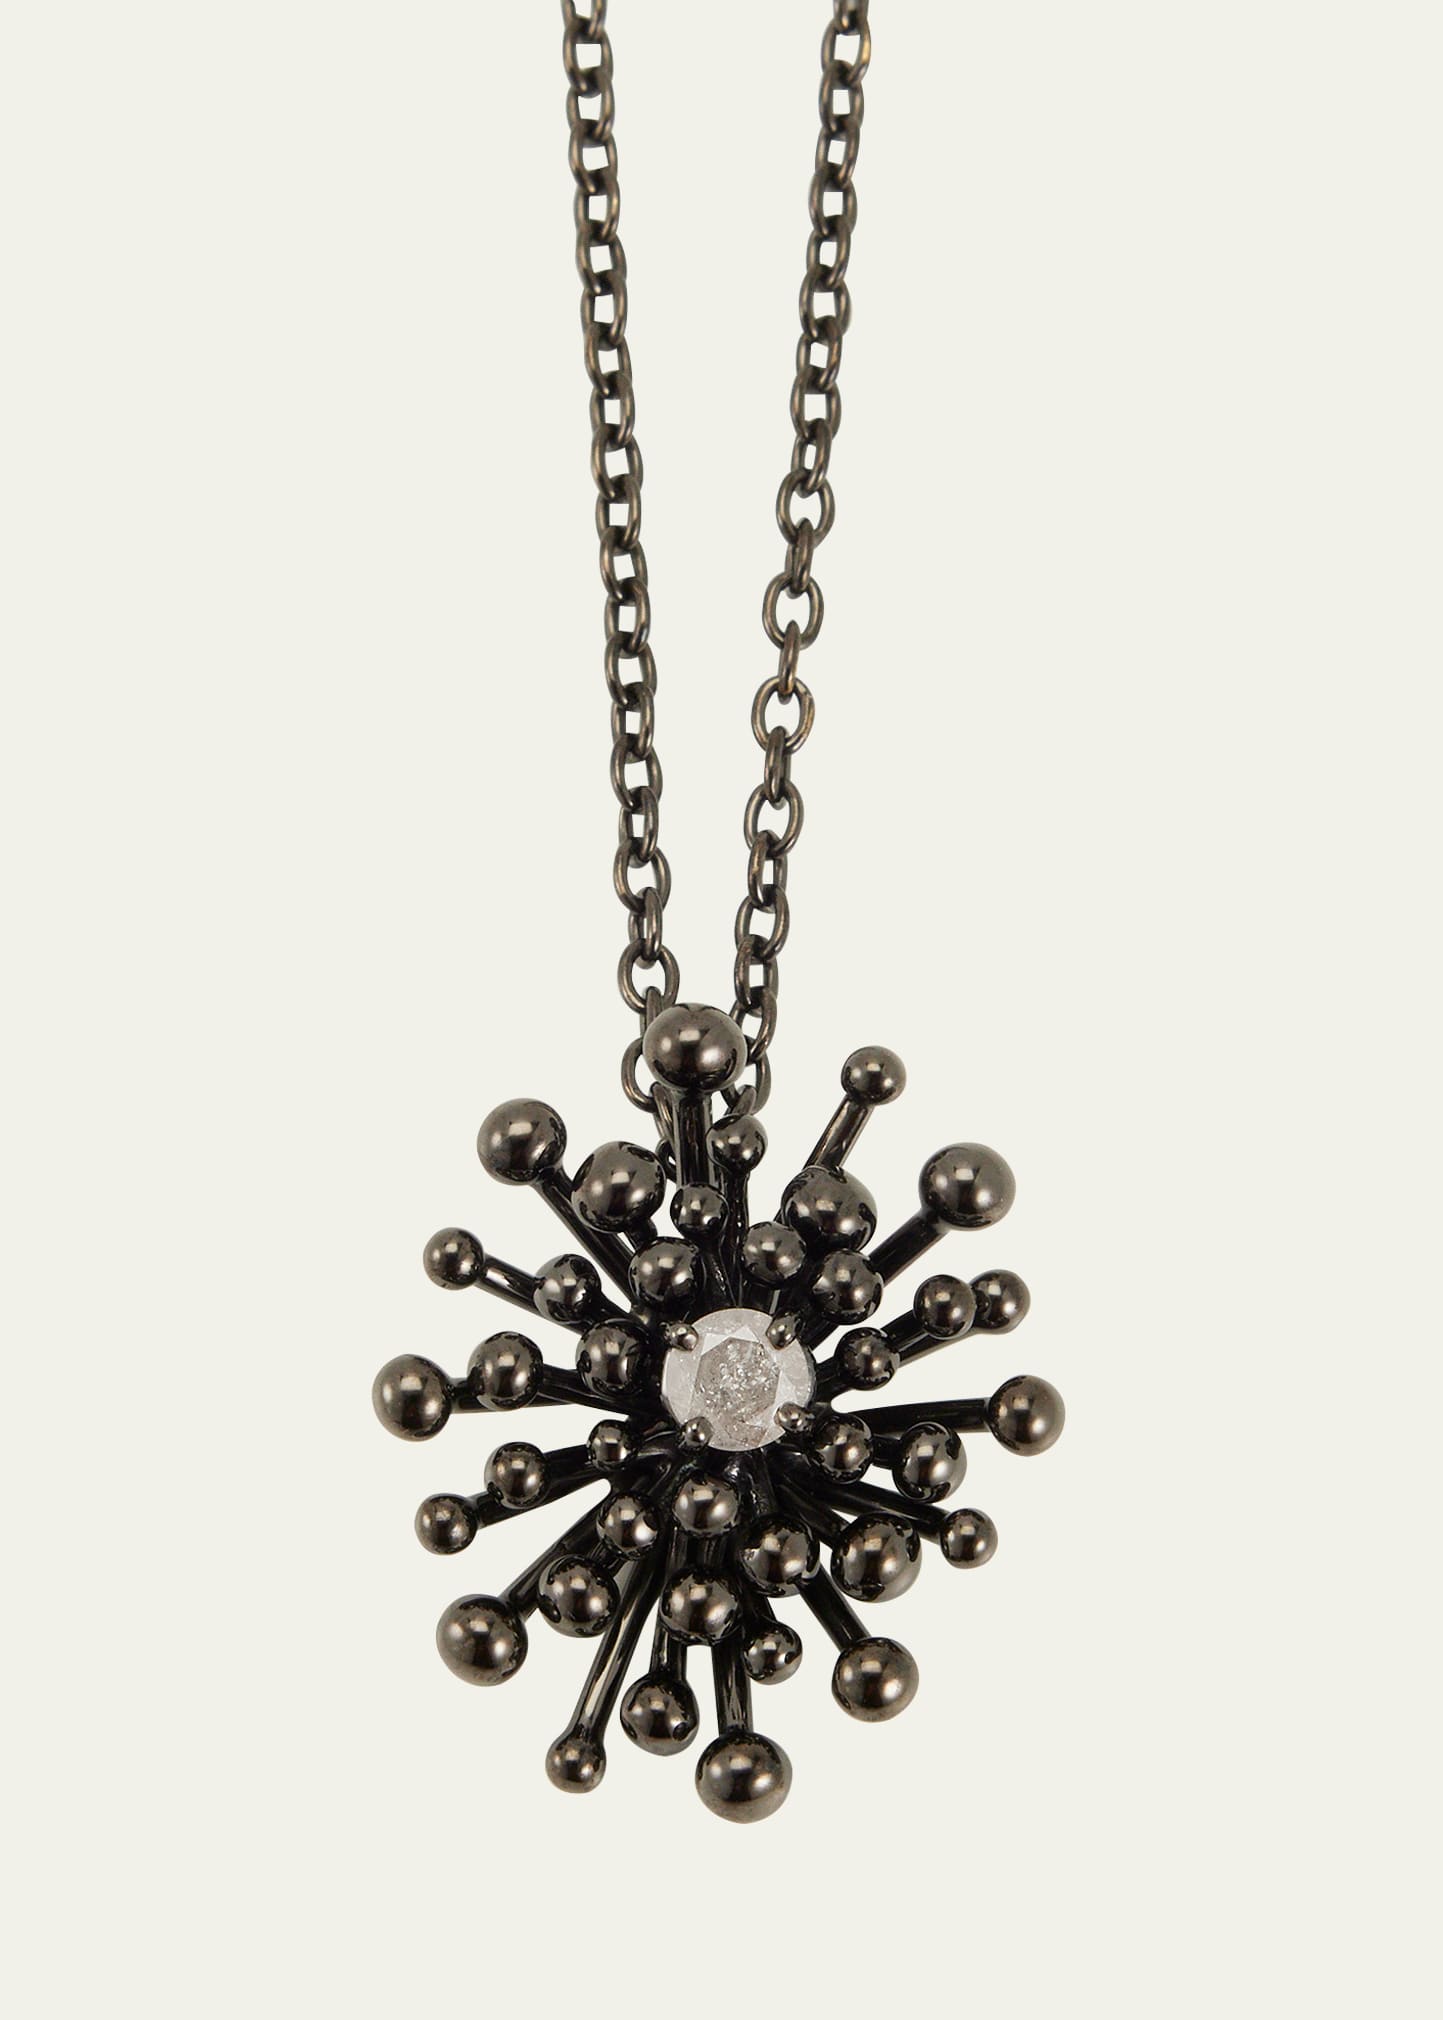 18K White Gold and Black Rhodium Nocturne Pendant Necklace with Gray Diamond